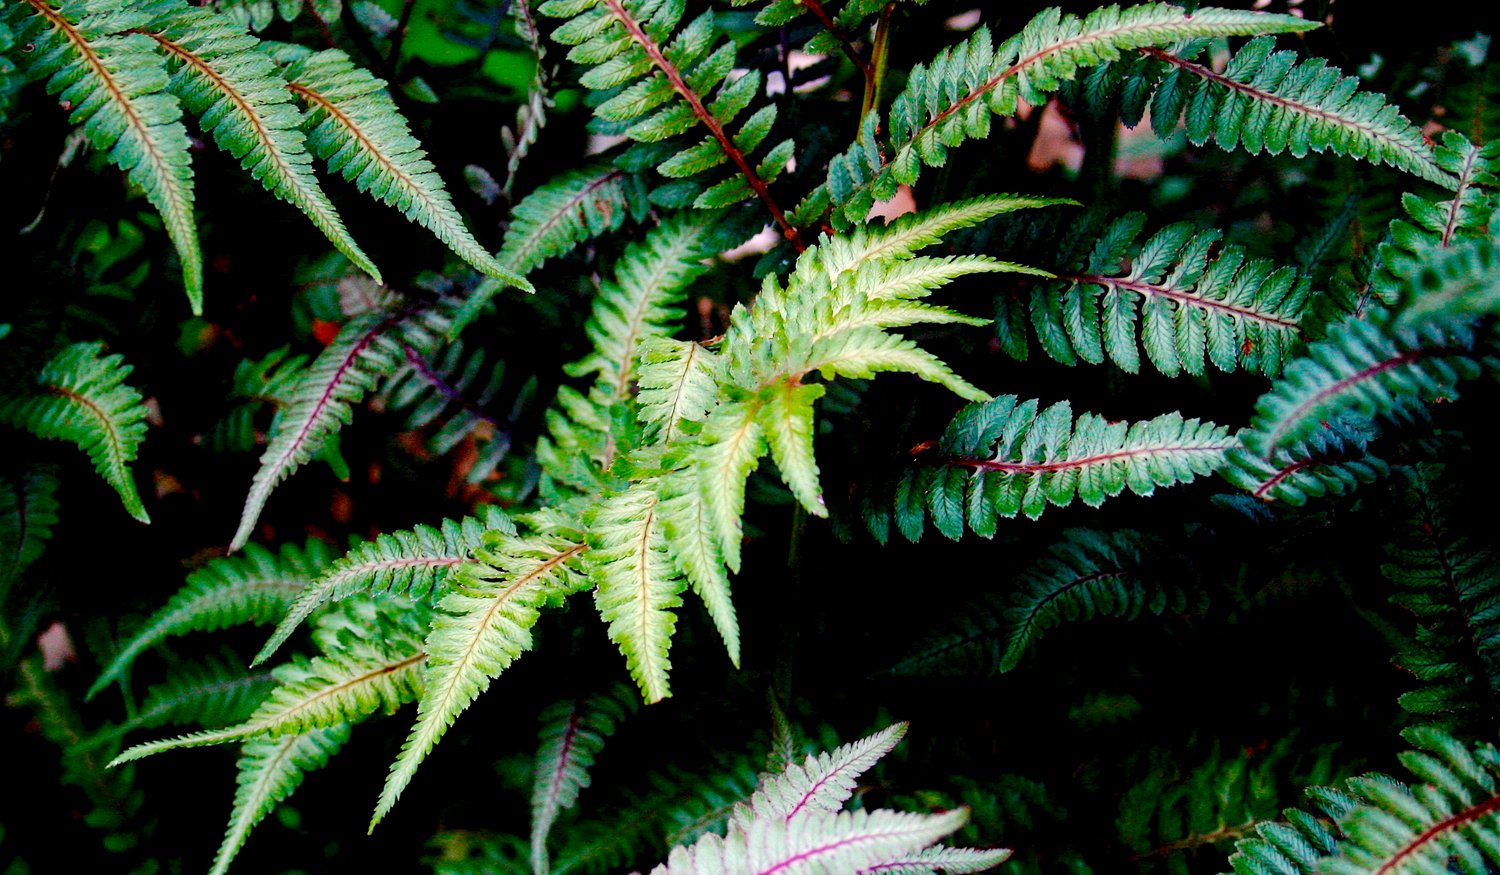 ALL-GREEN GOAL — Painted Japanese ferns growing near a home in New Market, Va. Their blue-green fronds with contrasting deep red ribs complement the monochromatic palette of a restive all-green garden.